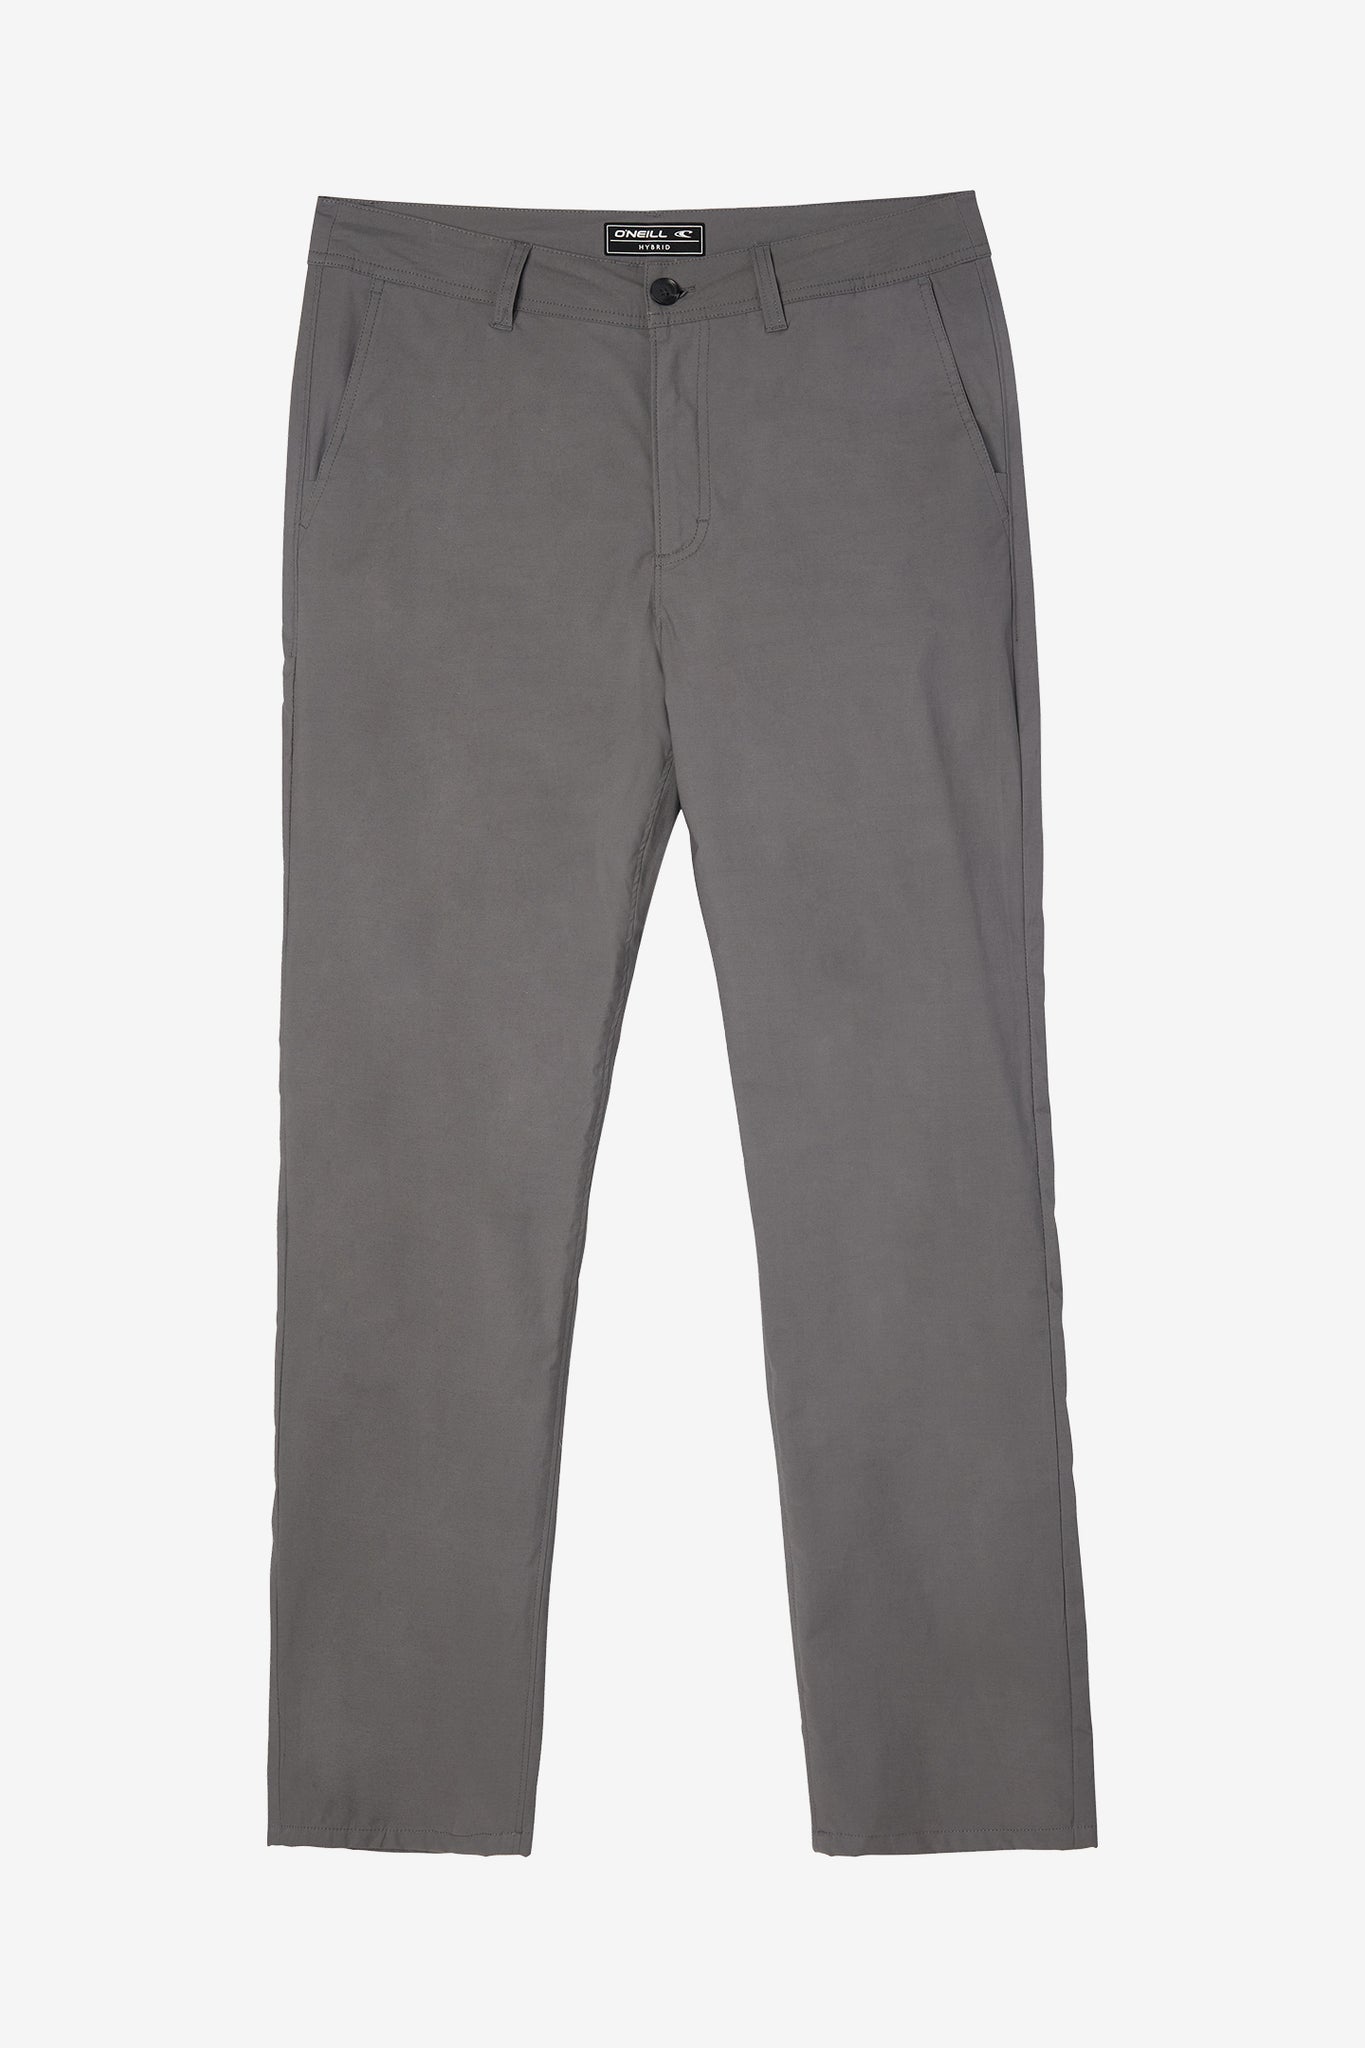 Mission Lined Hybrid Pants - Grey | O'Neill